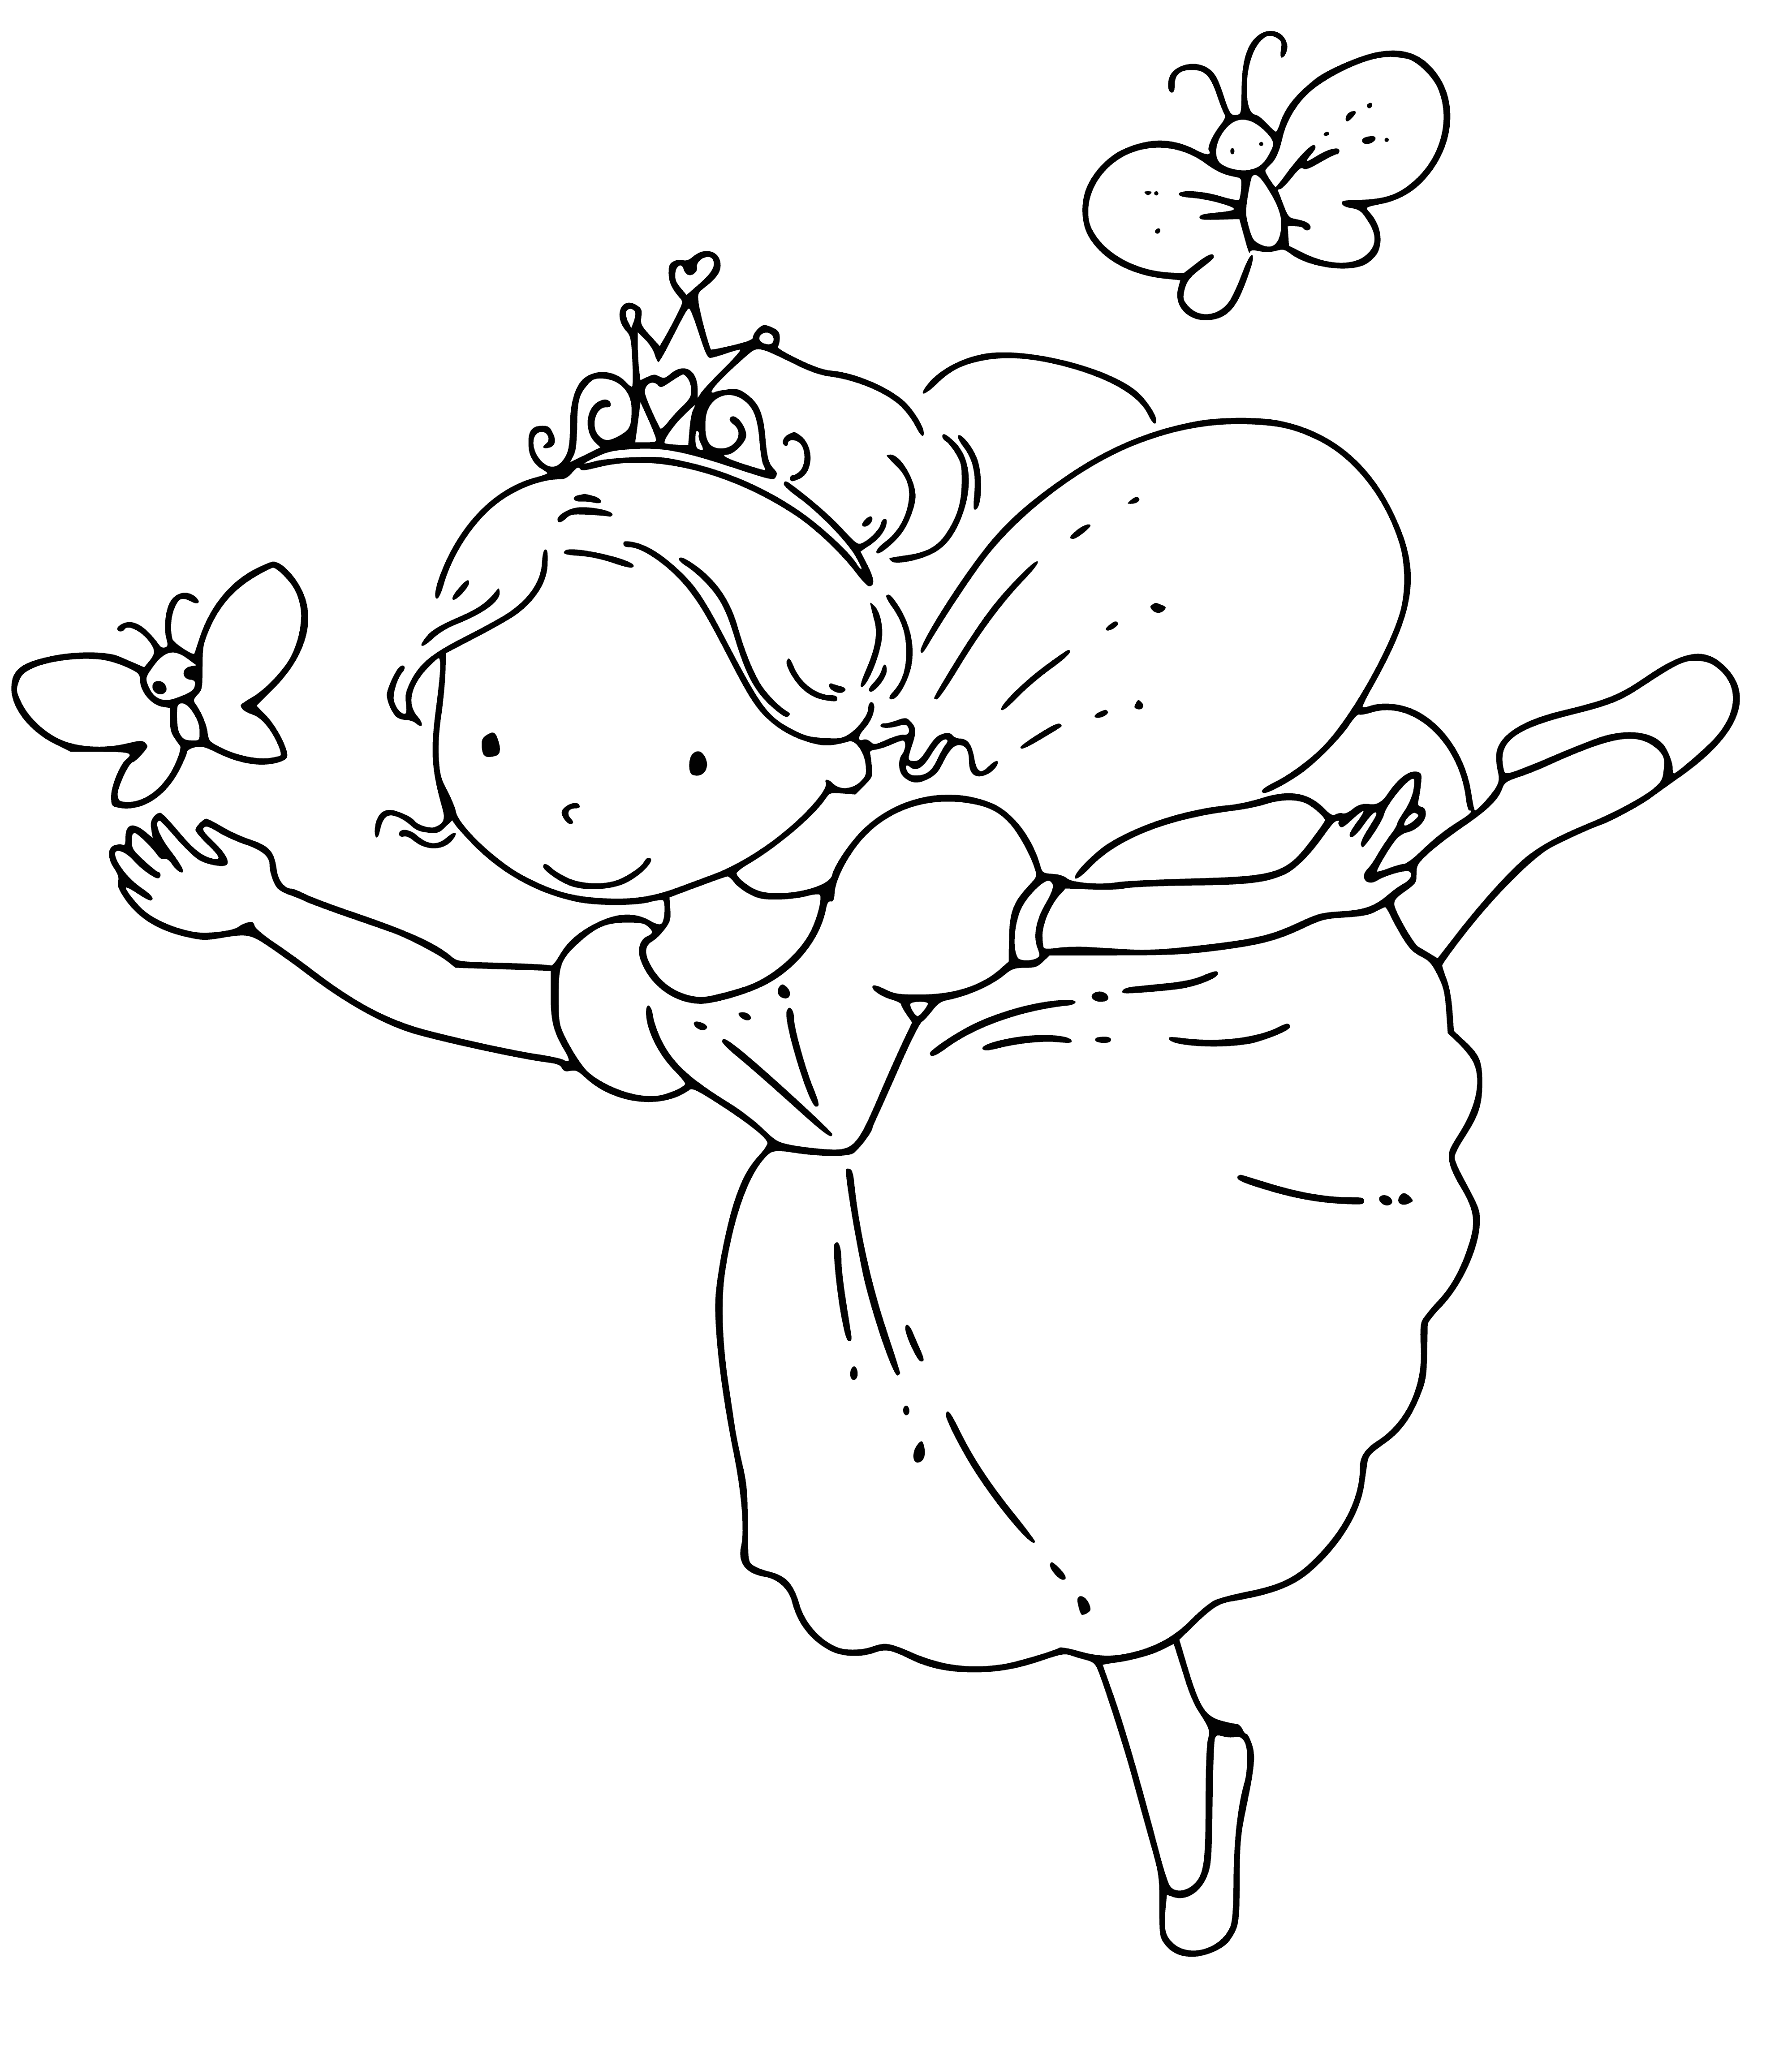 coloring page: Elves & fairies circle dance in green, w/wings & pointy hats. Fairy at top of circle flies as they joyfully move in clockwise direction.